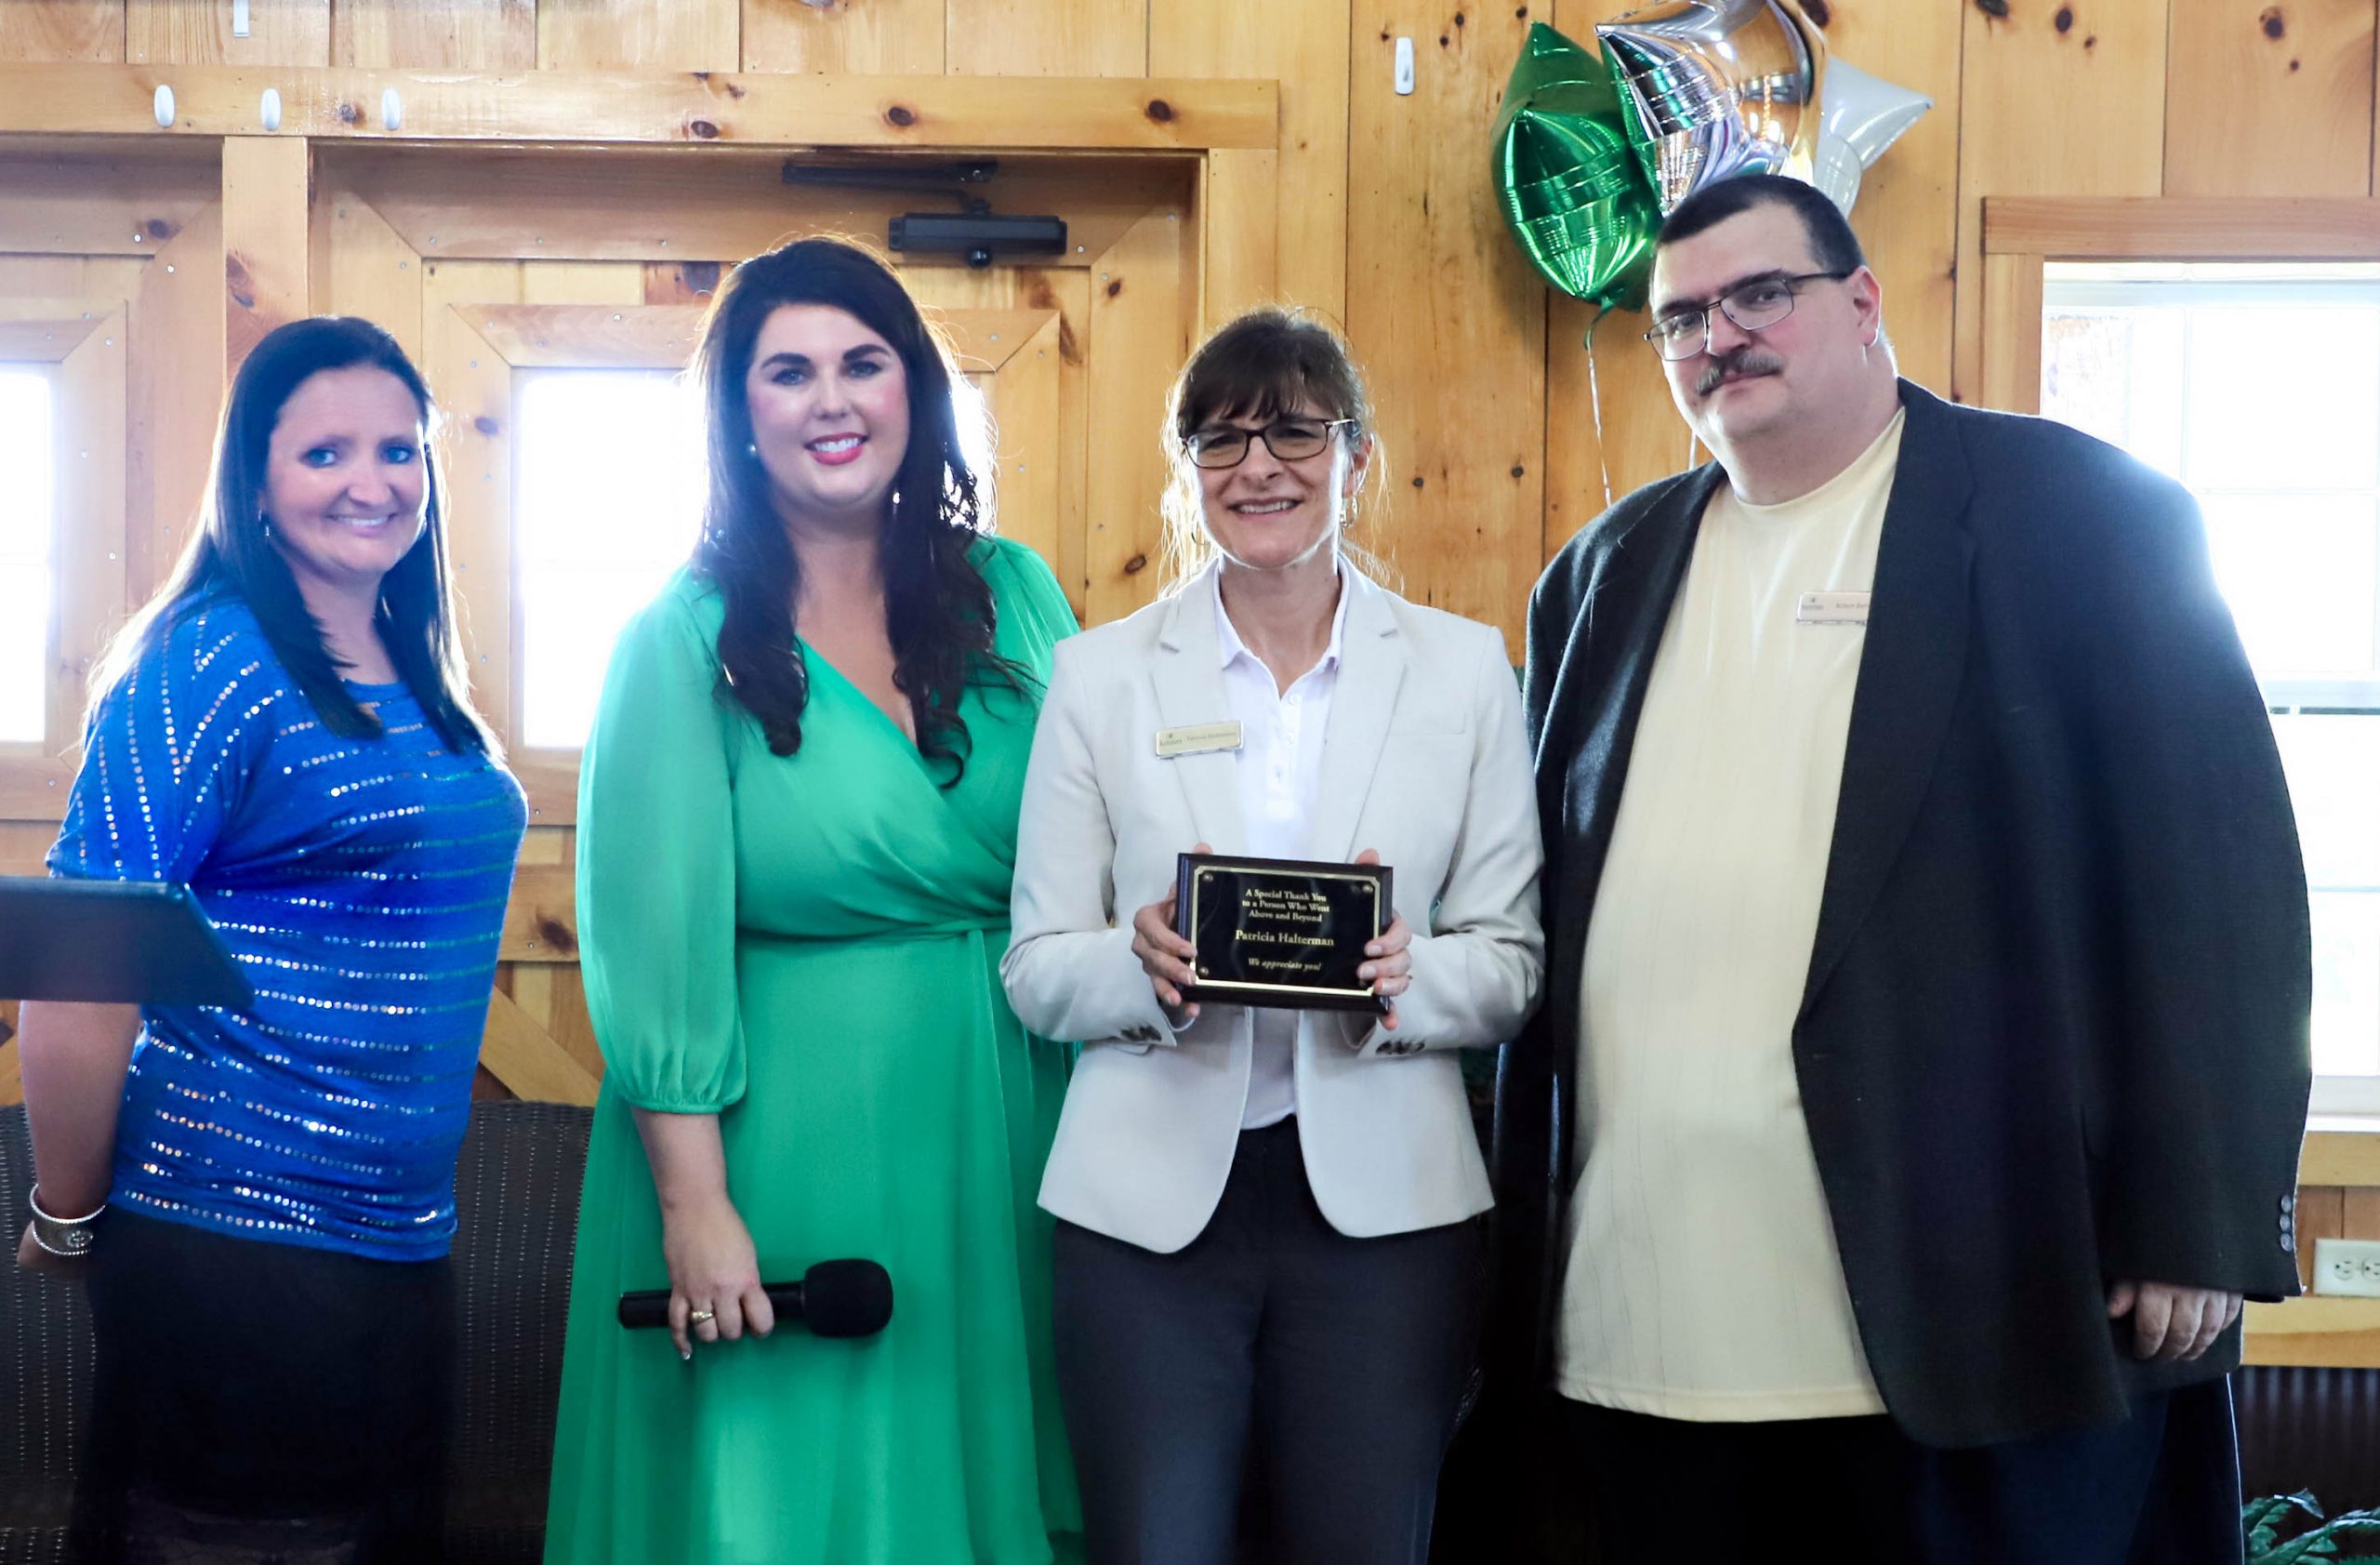 Patricia "Trish" Halterman (holding plaque) was honored for her service with the Farm Fellow and Ag Workforce Training programs at Eastern. With Trish are Carissa Beard (from left), Megan Webb, and Rob Burns.